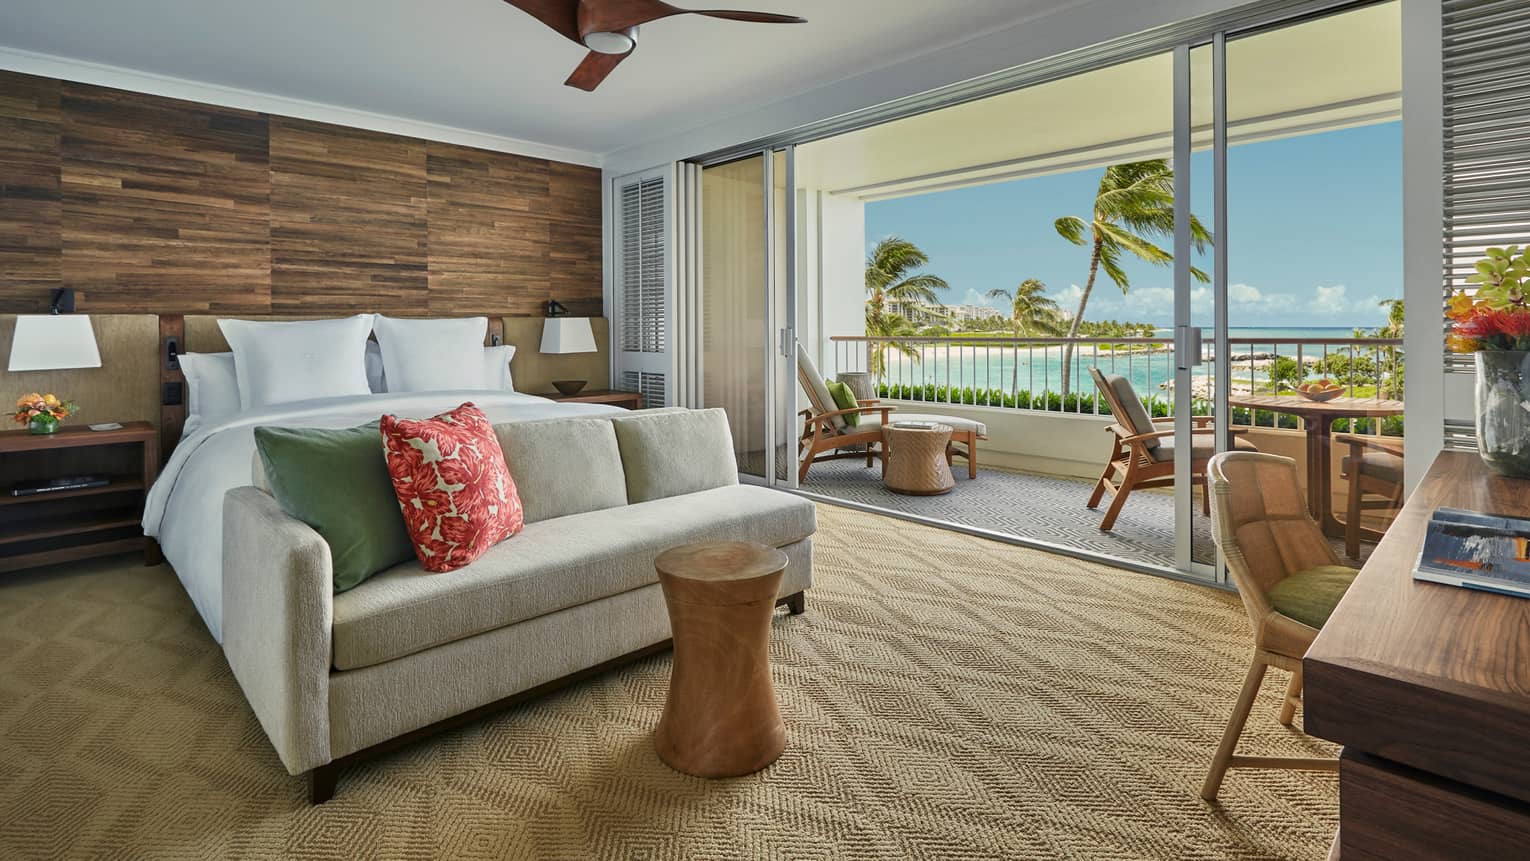 Prime Corner Oceanfront Room loveseat at foot of bed against wood grain wall, balcony wall